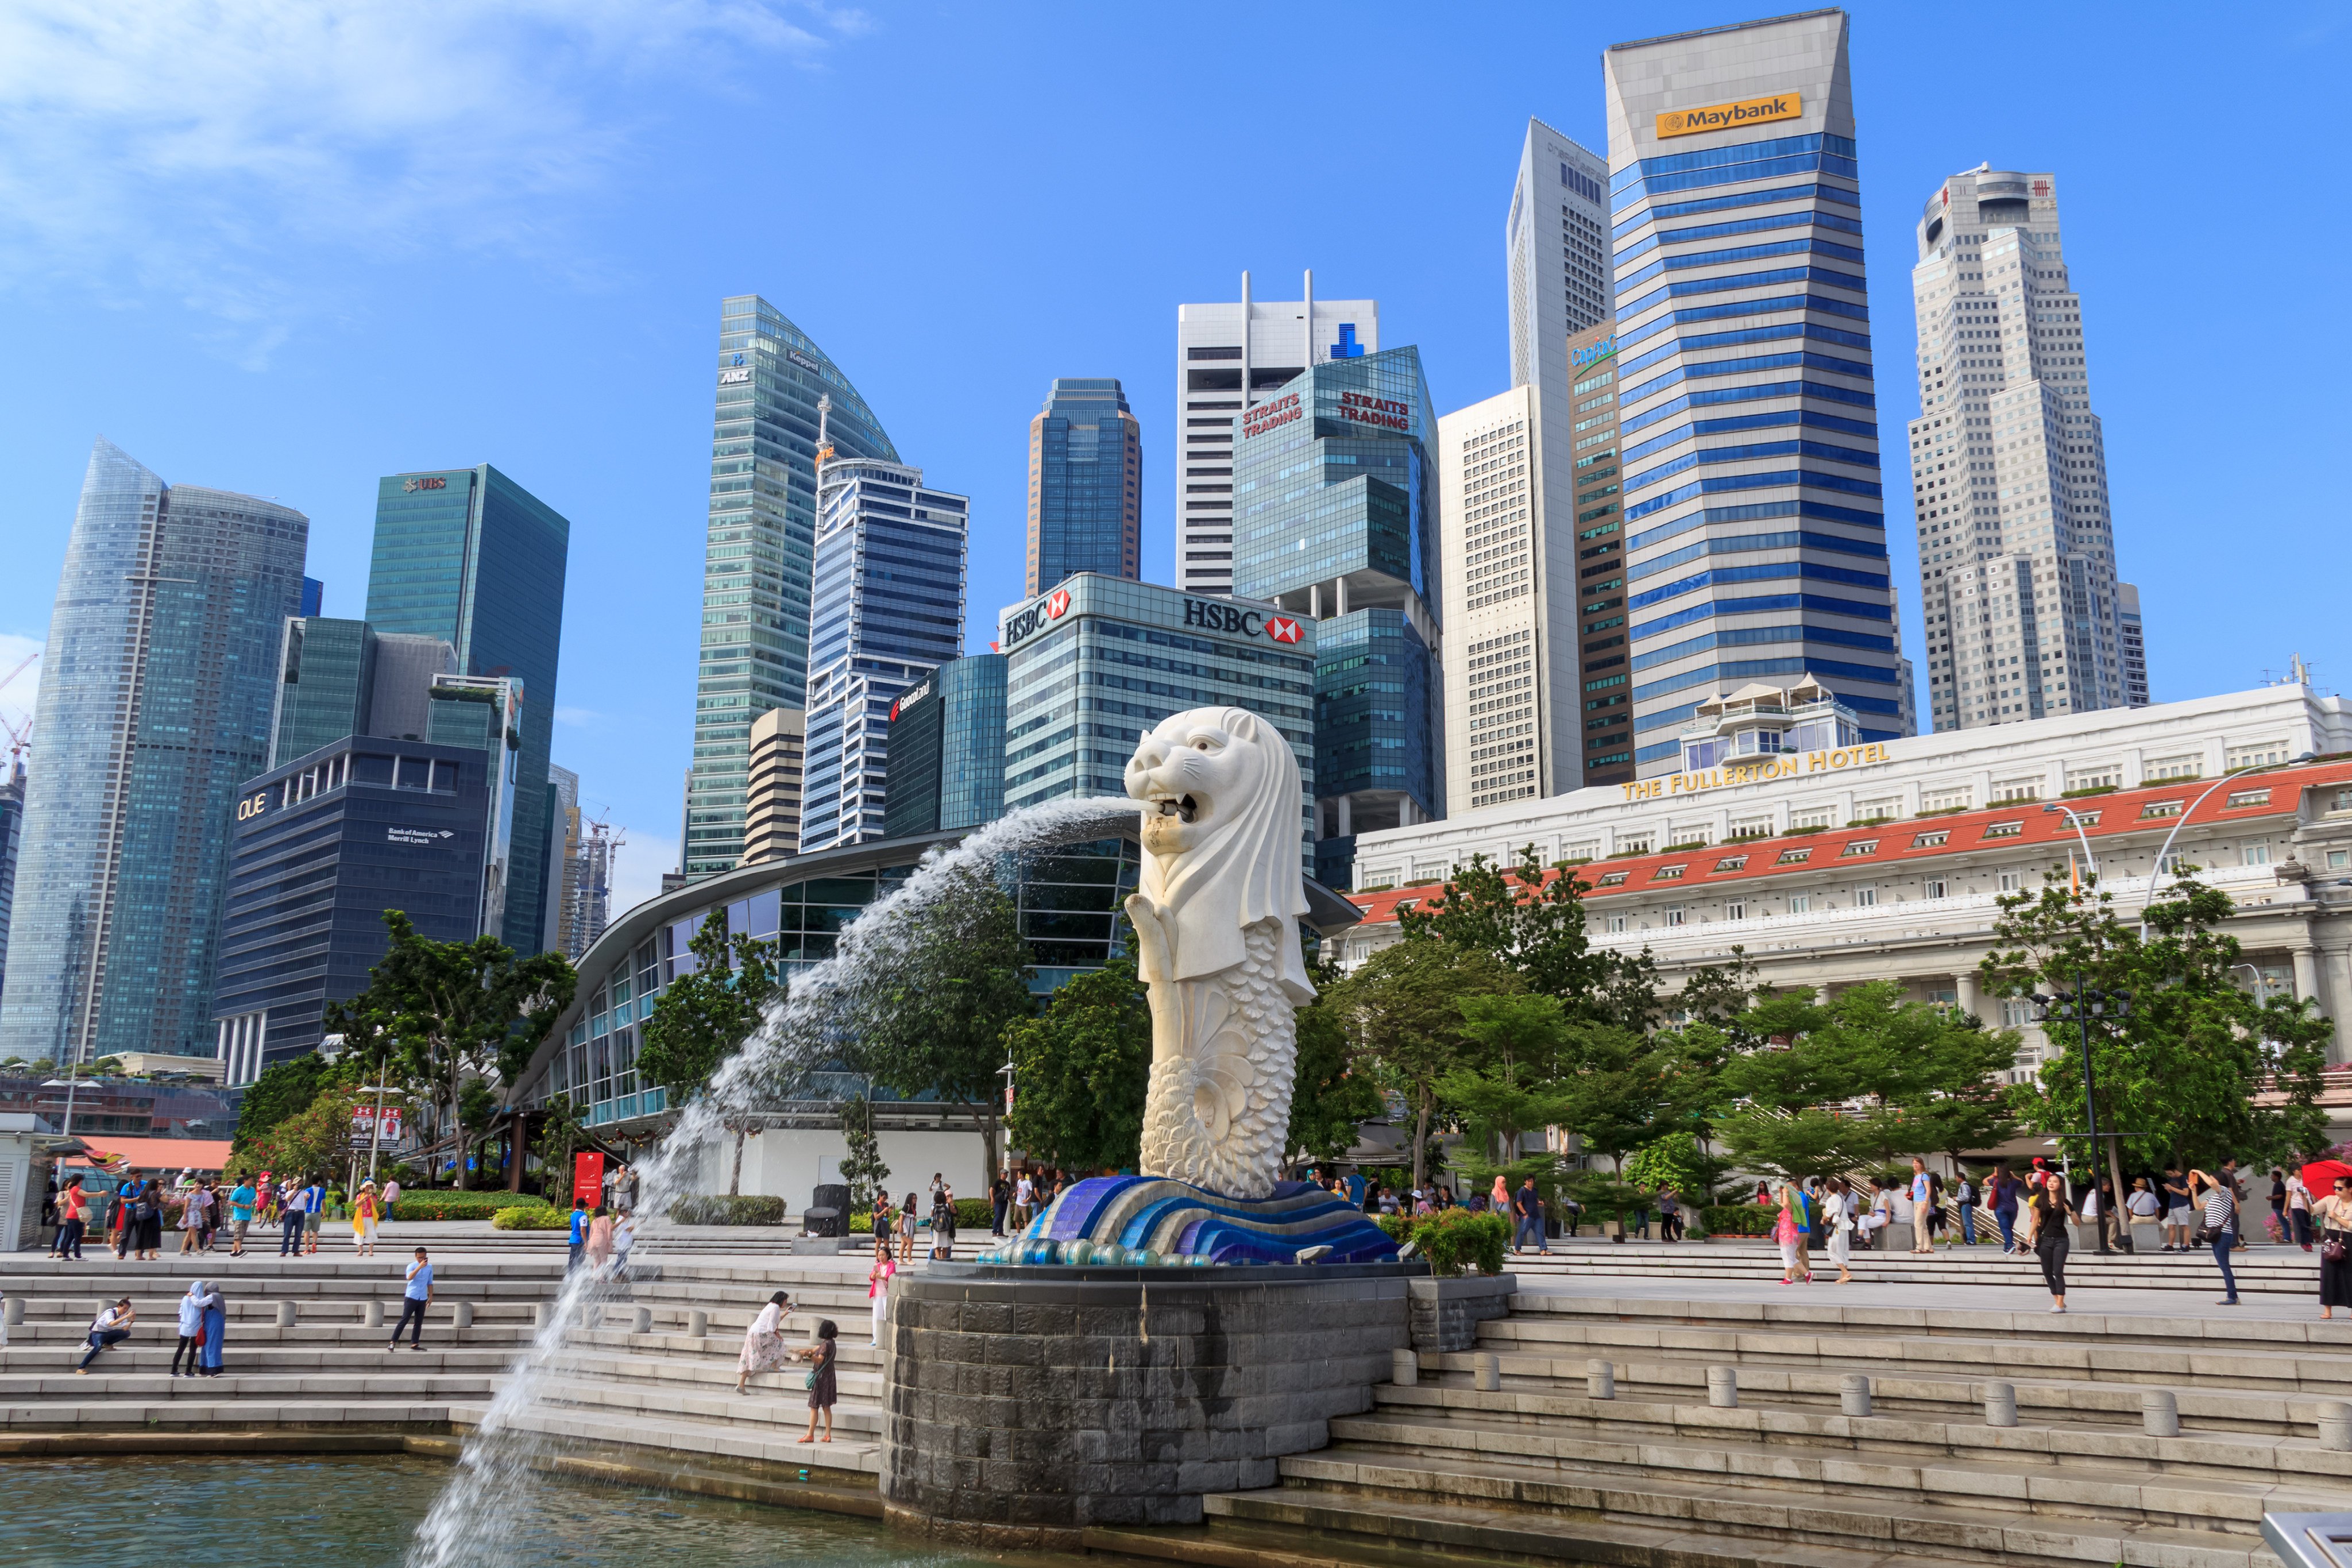 Singapore’s skyline. The affluent city state’s economic performance is often seen as a barometer of the global environment because of its reliance on international trade. Photo: Shutterstock